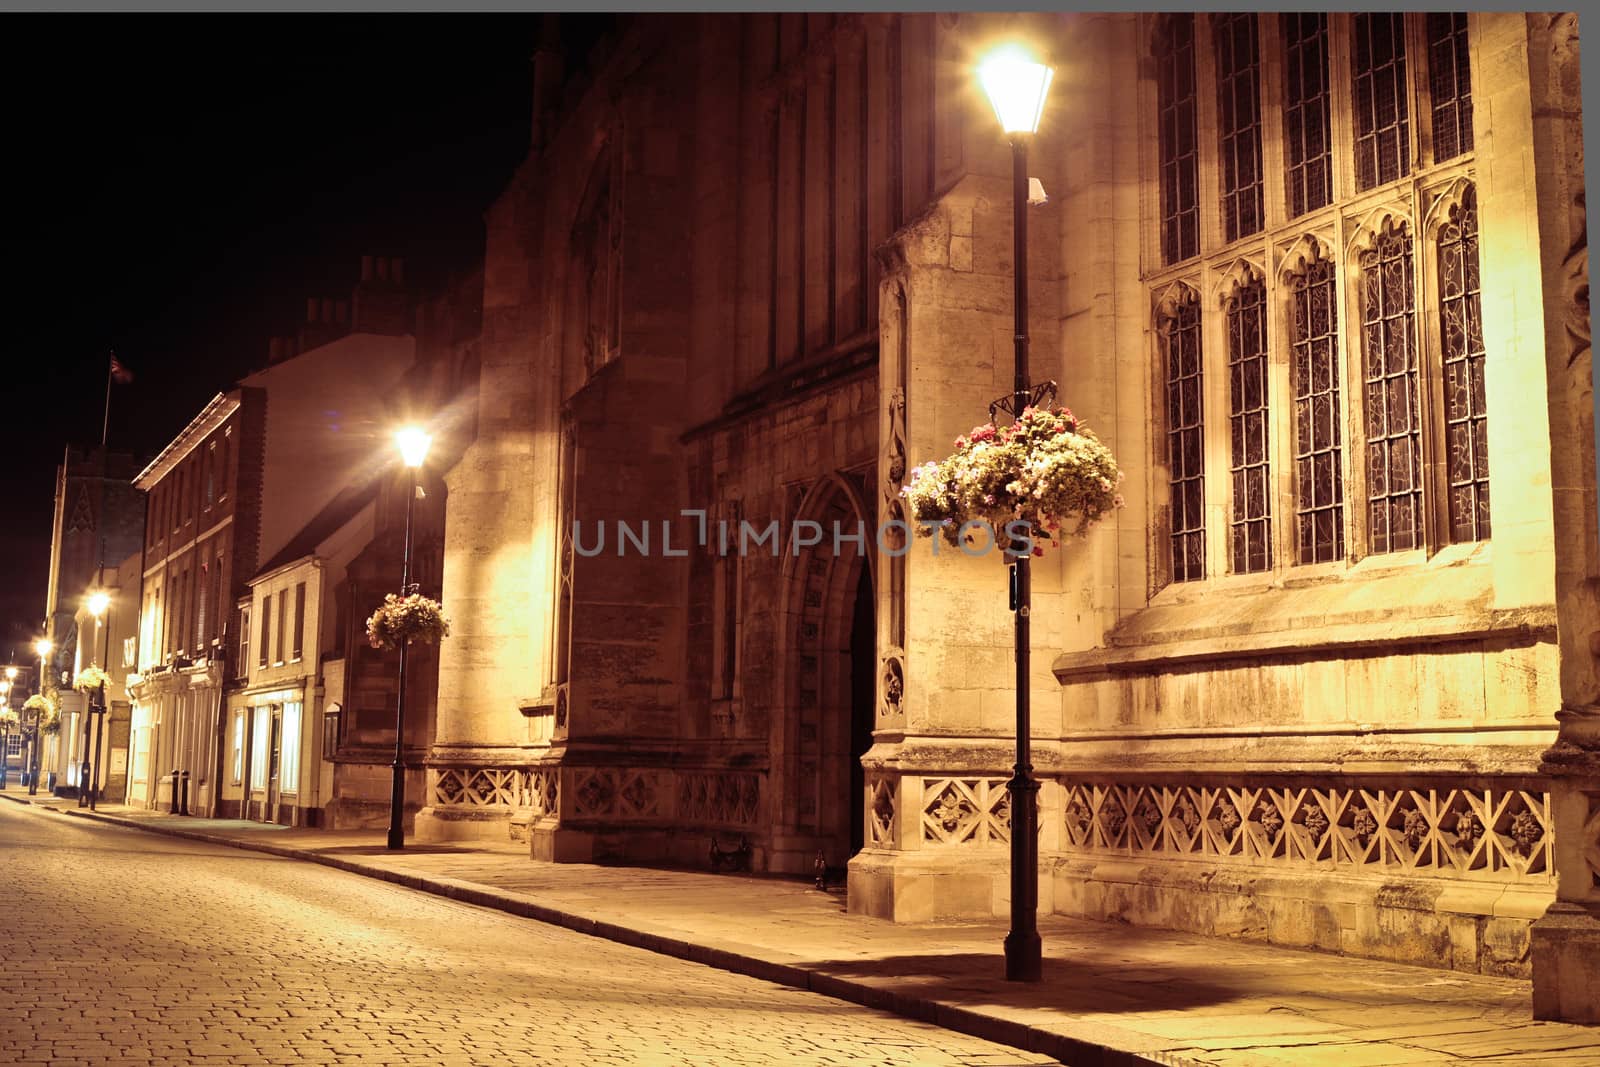 Medieval cathedral and steet at night with street lighting